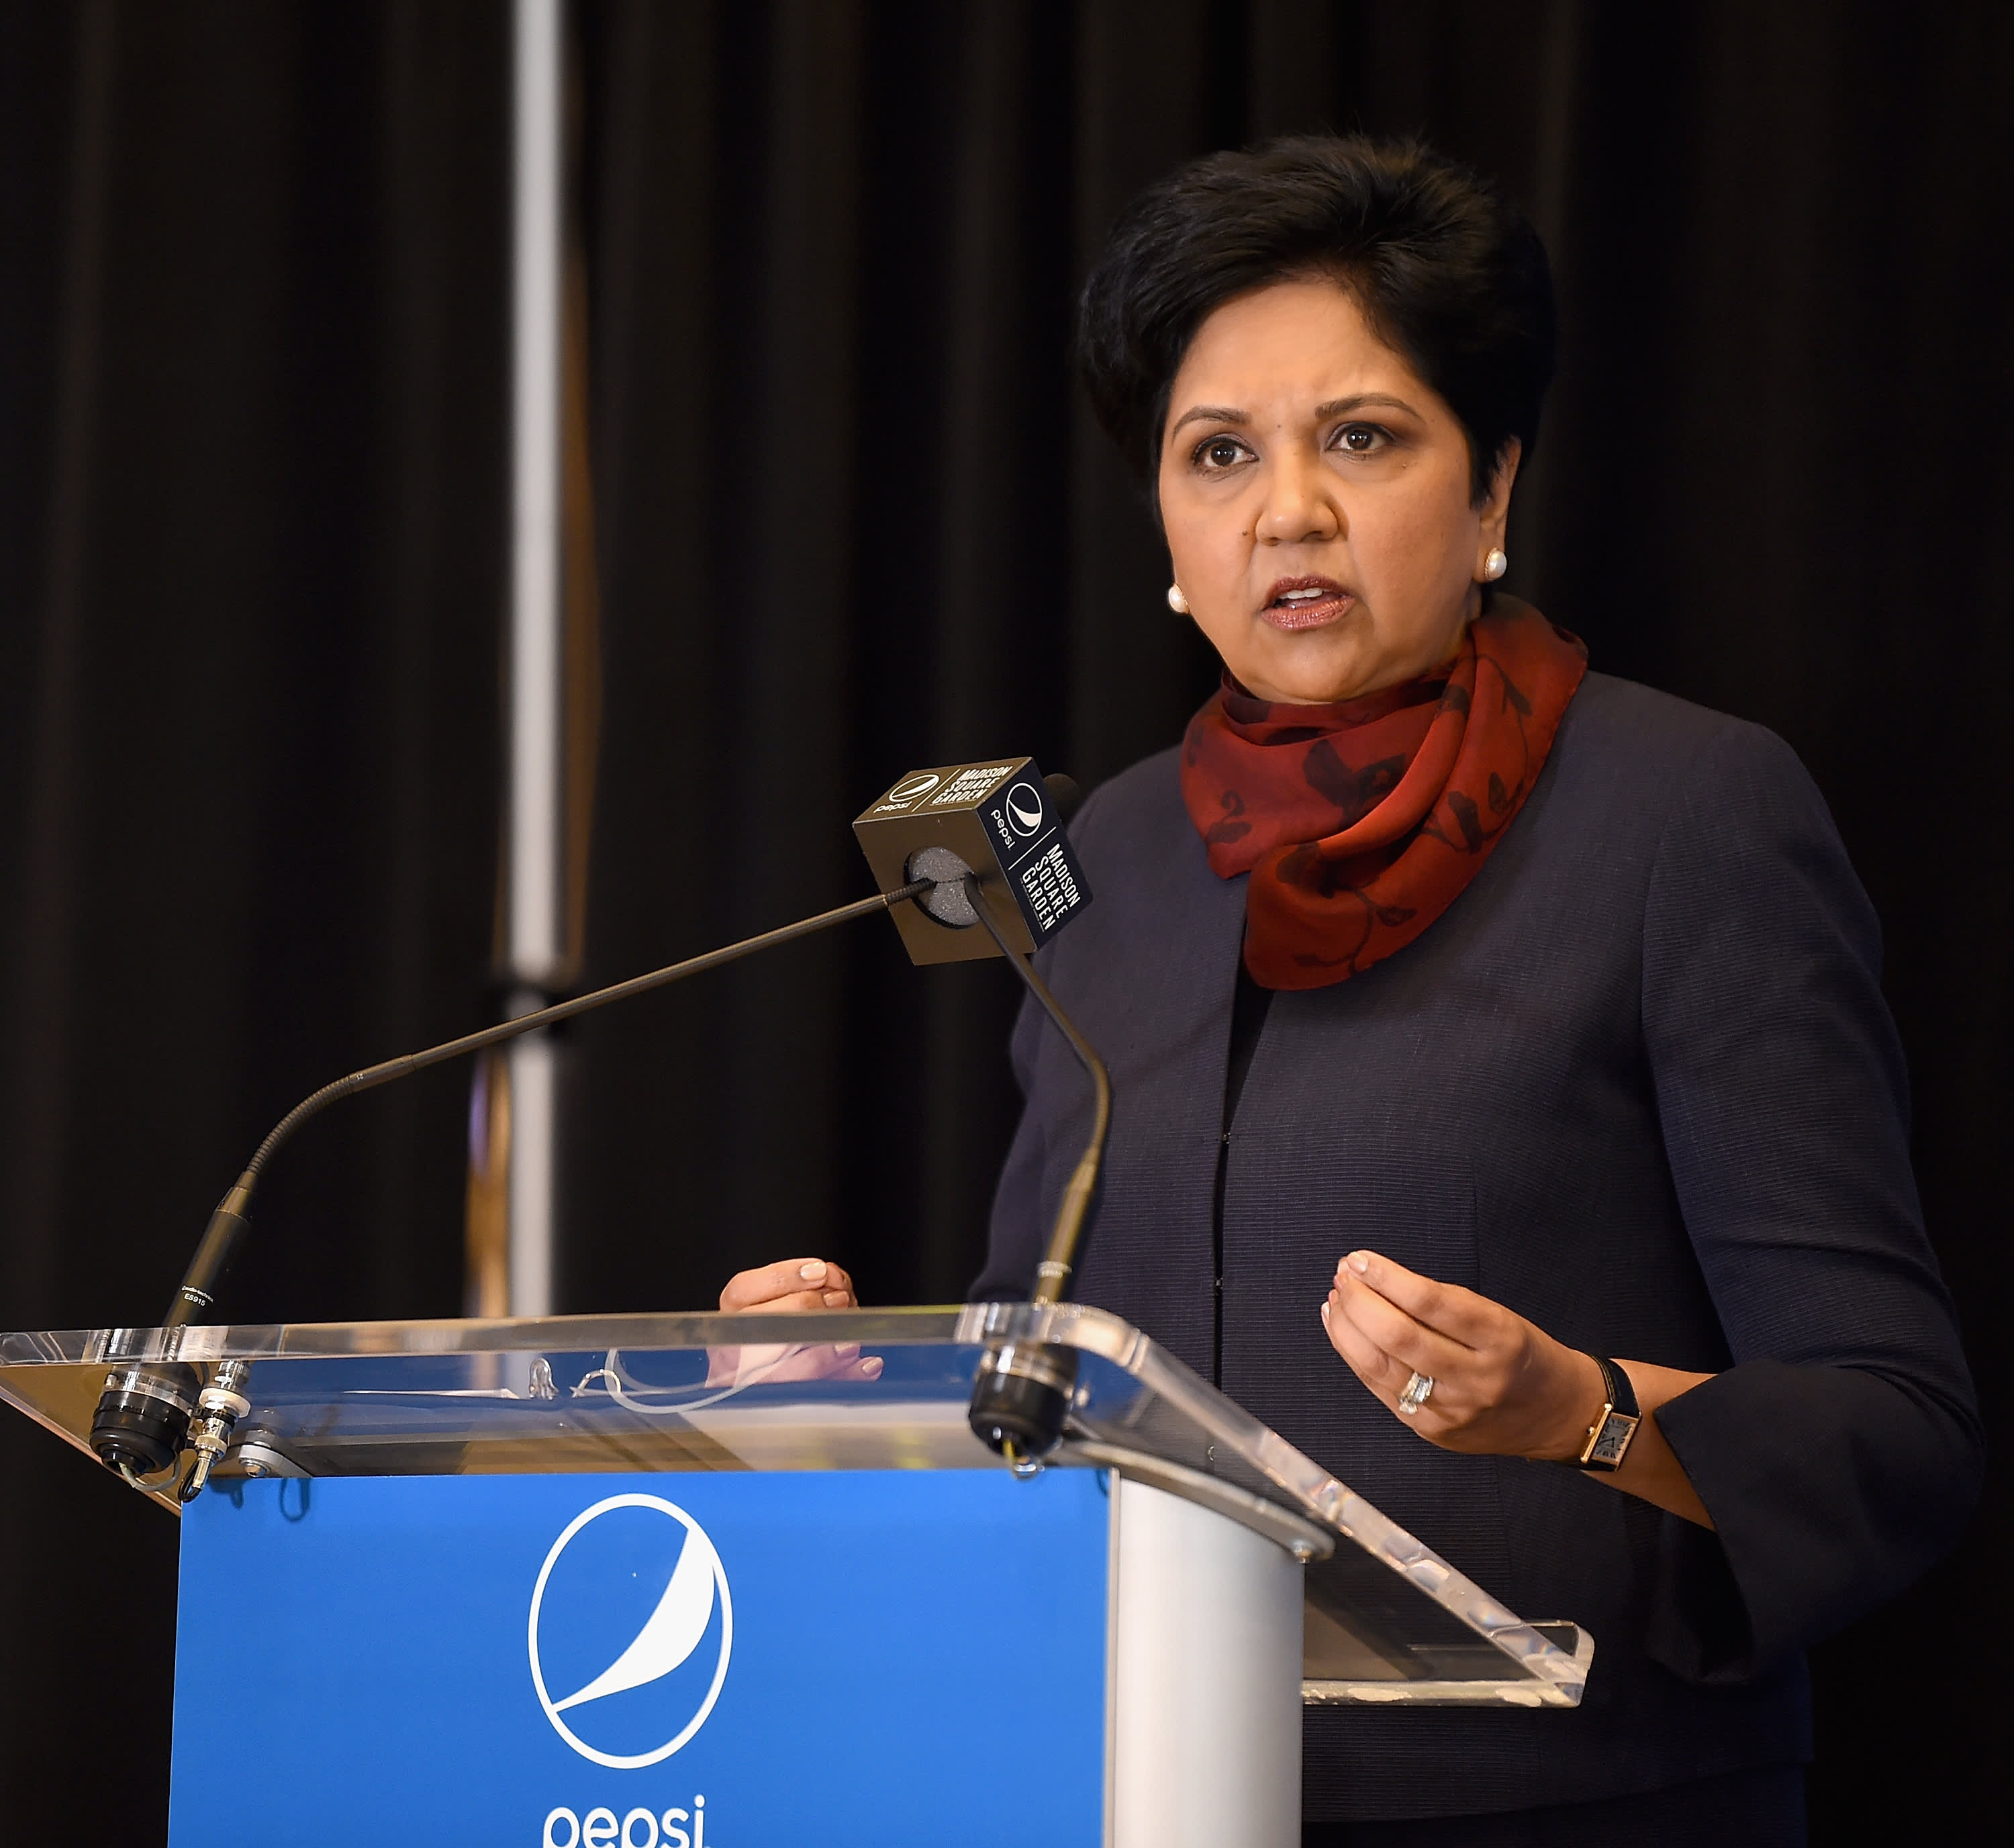 Indra Nooyi shared a work regret on her last day as PepsiCo CEO